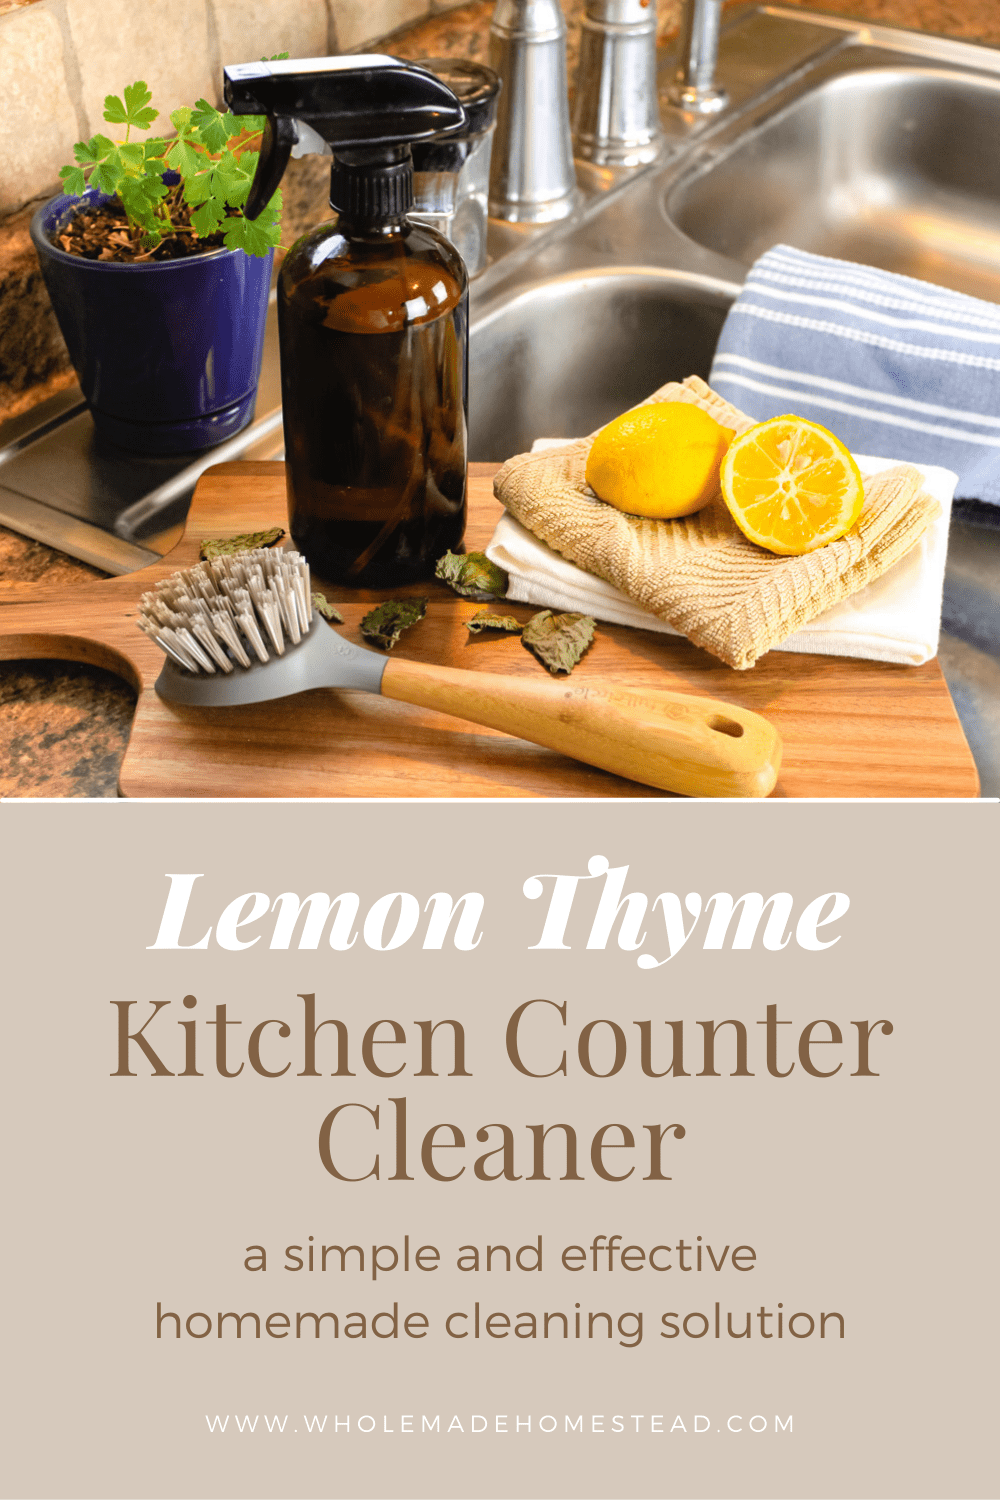 Lemon Thyme: How To Use It In The Kitchen